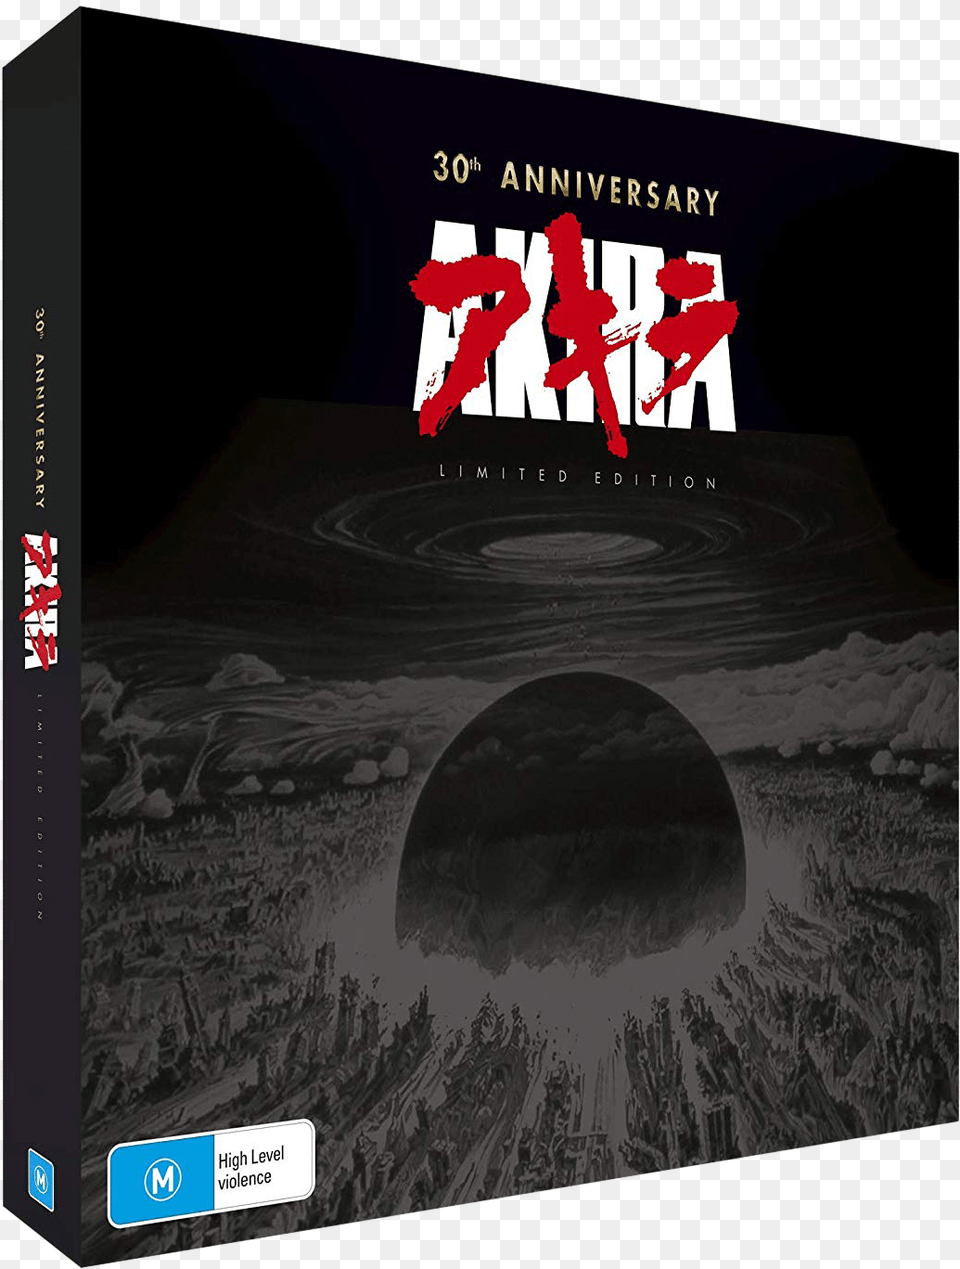 30th Anniversary Limited Edition 2x Lp Blu Ray Boxed Akira 30th Anniversary Limited Edition Box Set, Book, Publication, Nature, Outdoors Free Png Download